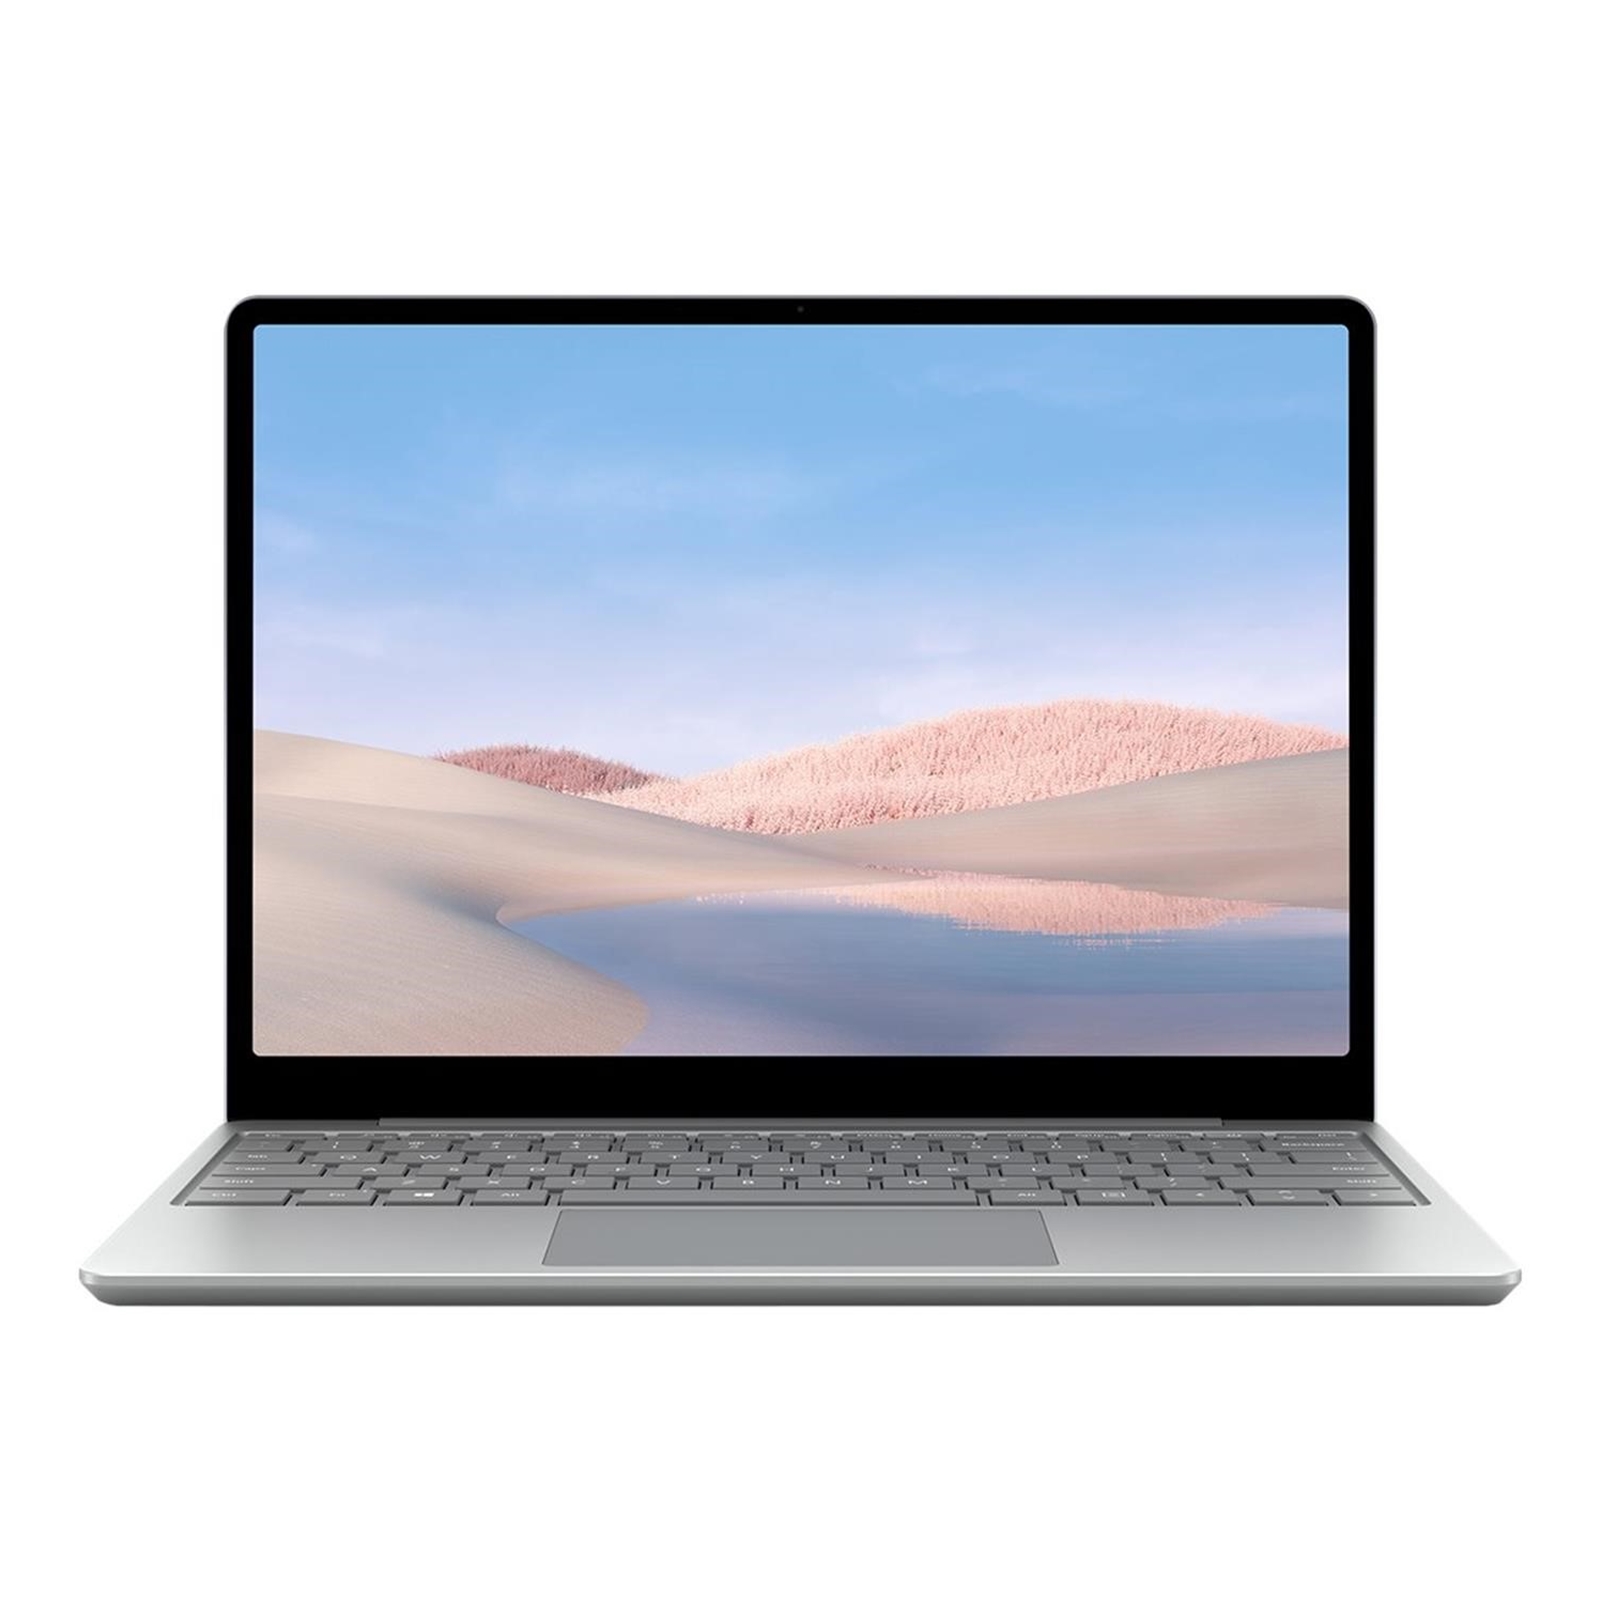 Microsoft Surface Laptop Go, 12.4 Inch Touchscreen, Intel Core i5 1035G1 10th Gen, 16GB RAM, 256GB SSD , Windows 10 Pro with UHD Graphics and Wi-Fi 6